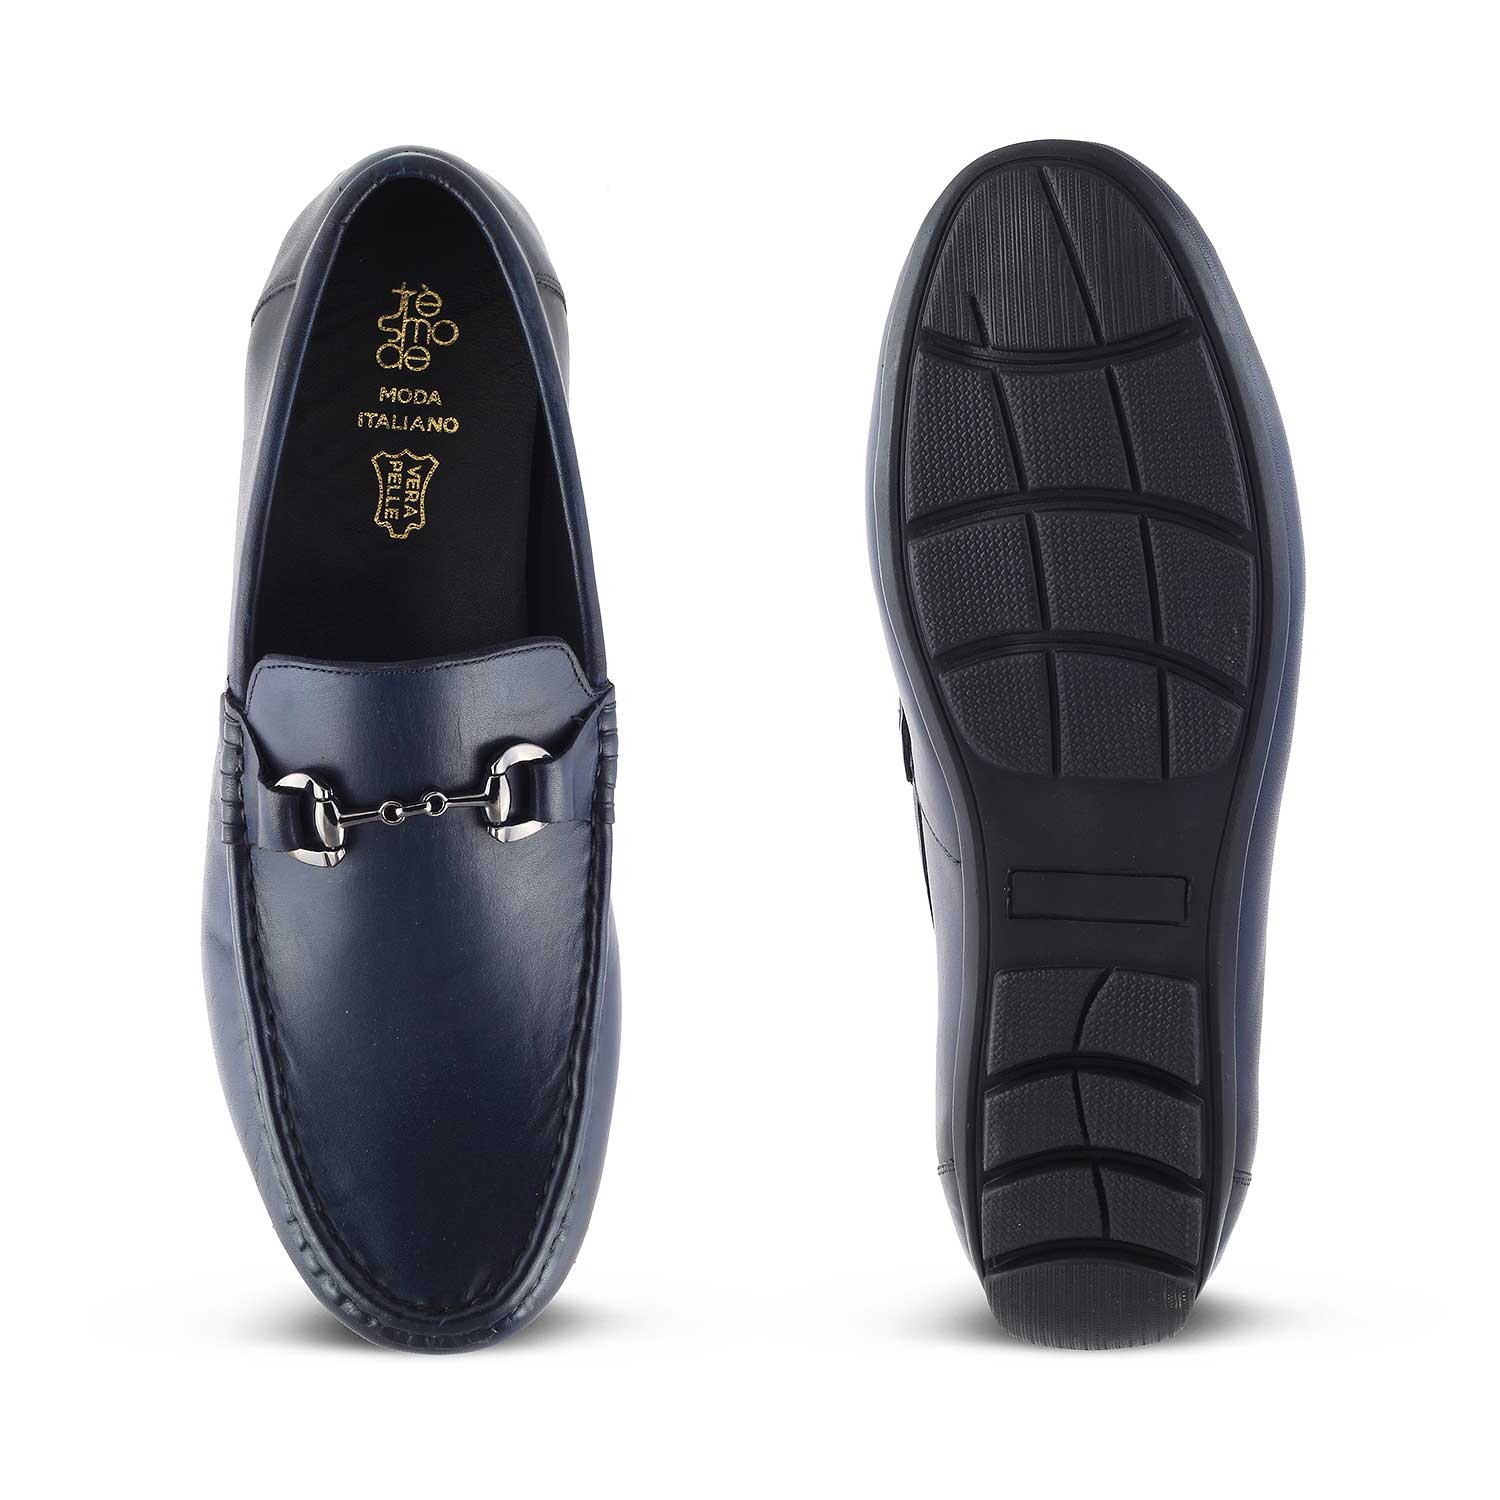 The Votterdam Navy Men's Leather Driving Loafers Tresmode - Tresmode